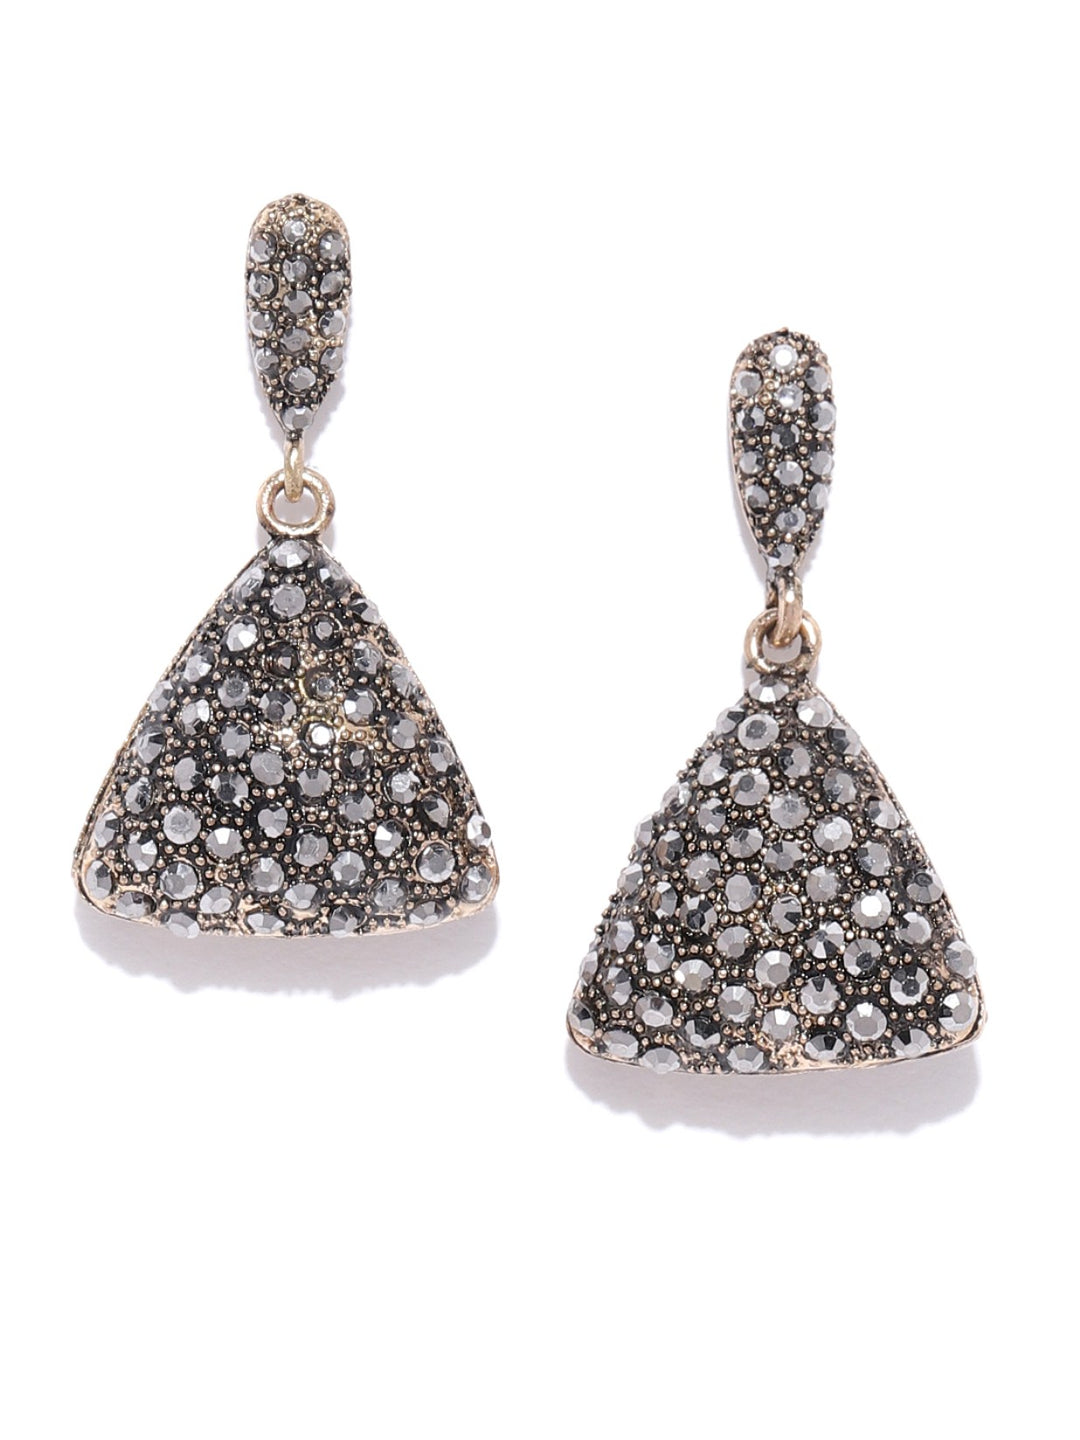 Designer Antique Gold Toned Stone Studded 3D Triangle Stylish Fashionable Drop Earrings For Women And Girls